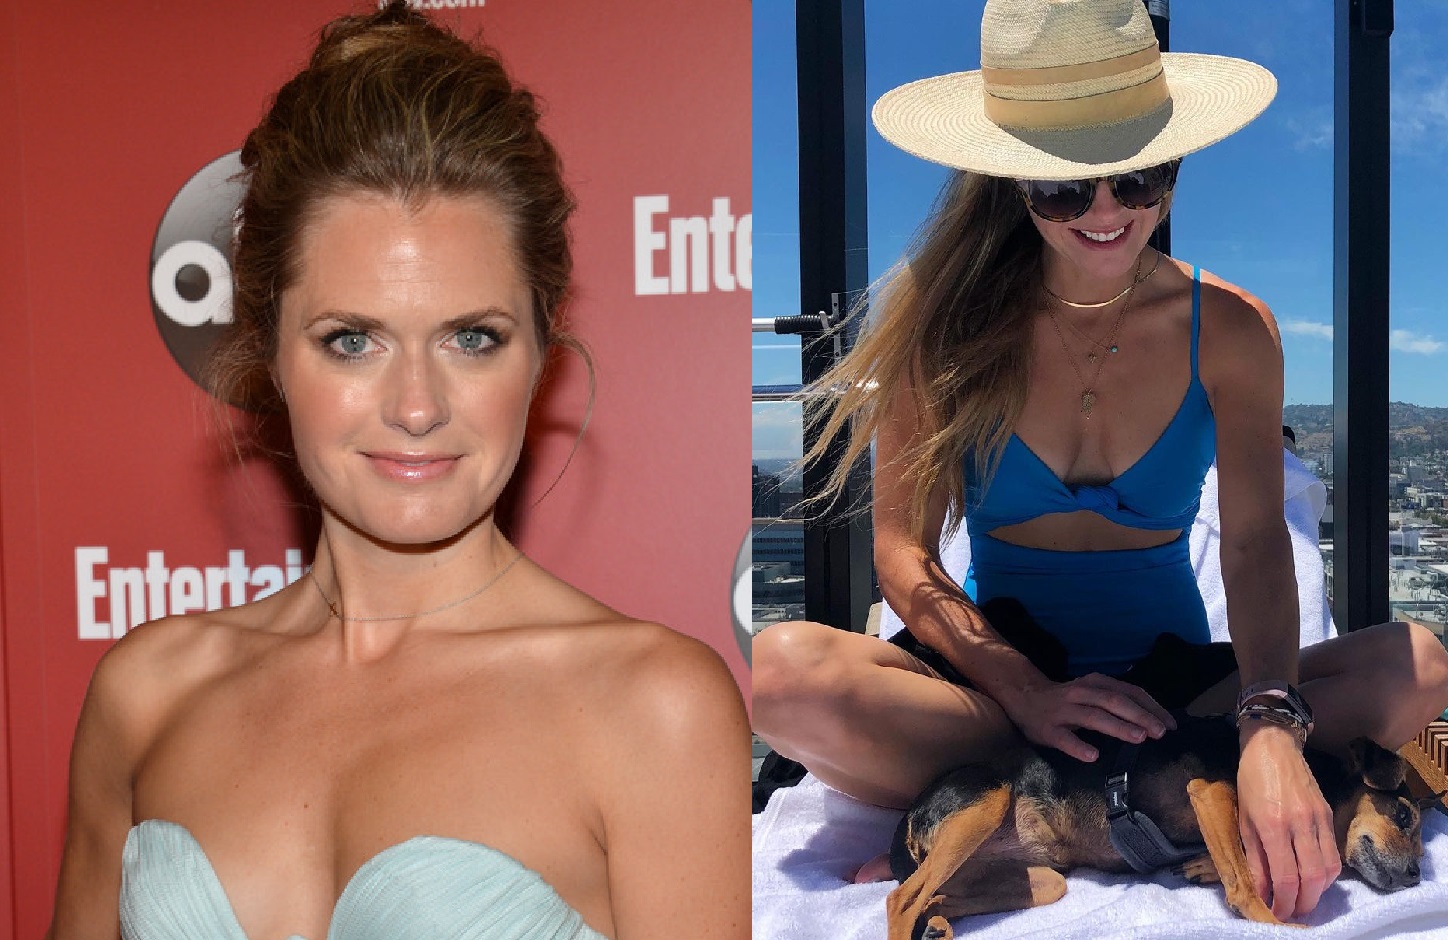 Maggie lawson is an american actress, best known for her roles in sitcoms a...